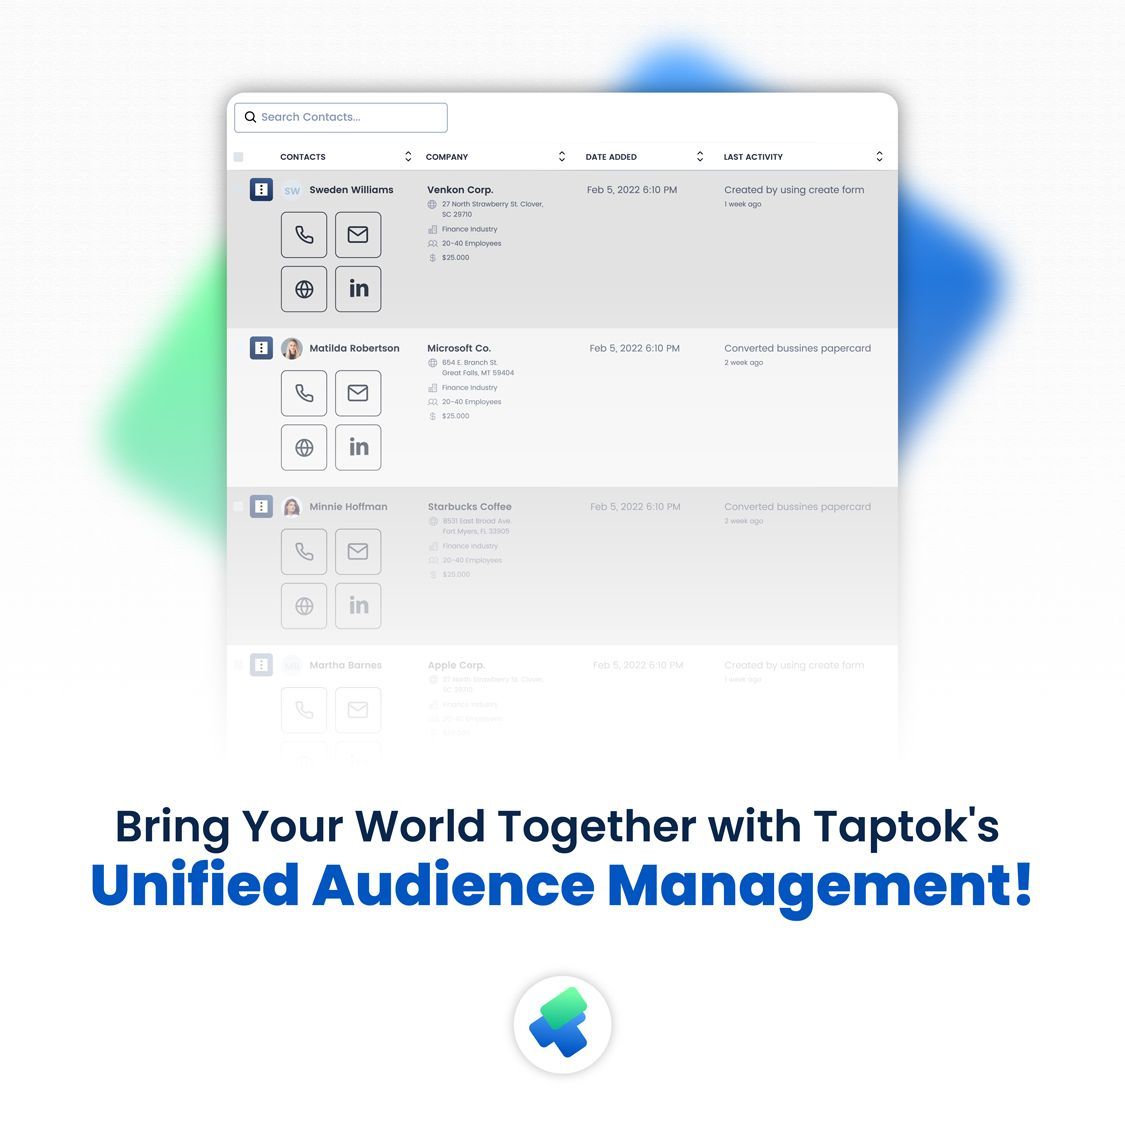 Imagine having all your contacts, leads, and connections in one easy-to-navigate dashboard. With Taptok, it's not just a dream – it's reality! Simplify your networking and audience management in a way that's both intuitive and powerful. 🌍✨
.
.
.
#TaptokTech #ContactManagement